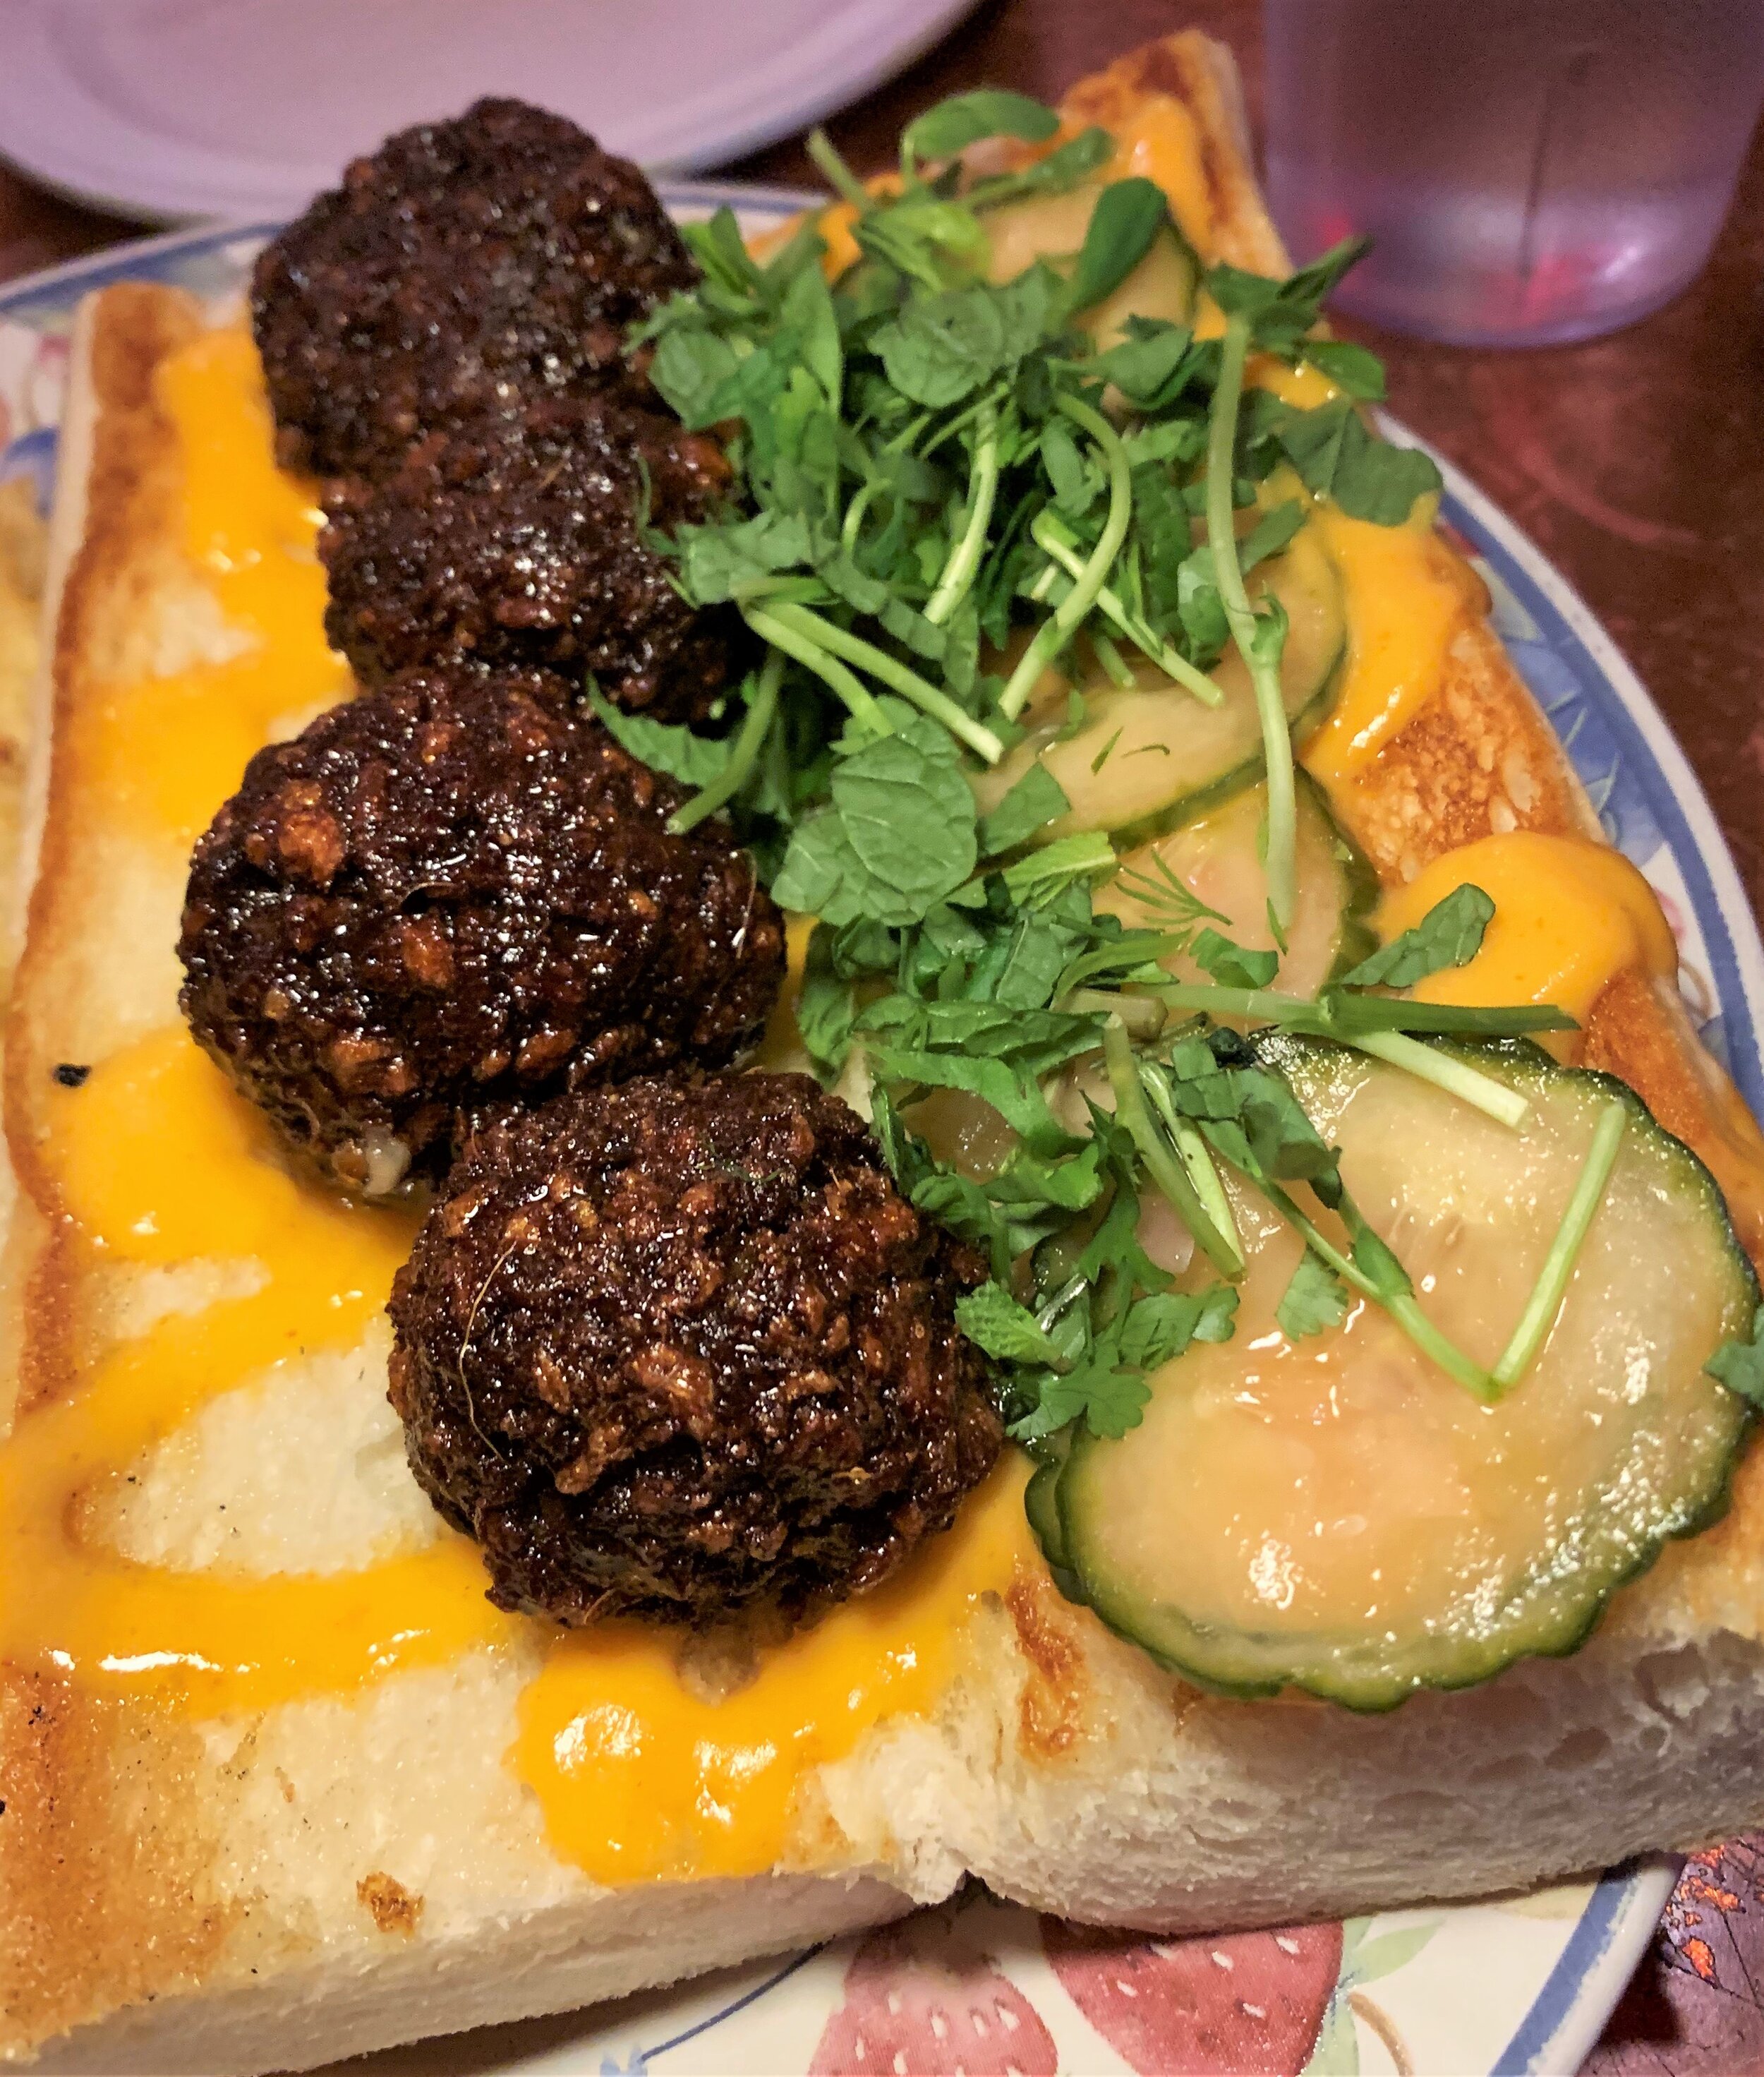 A banh mi sandwich with plant based meatballs using Impossible Foods burgers, plus mayo and pickles at Bar Luchador's I Can't Believe It's Vegan night.